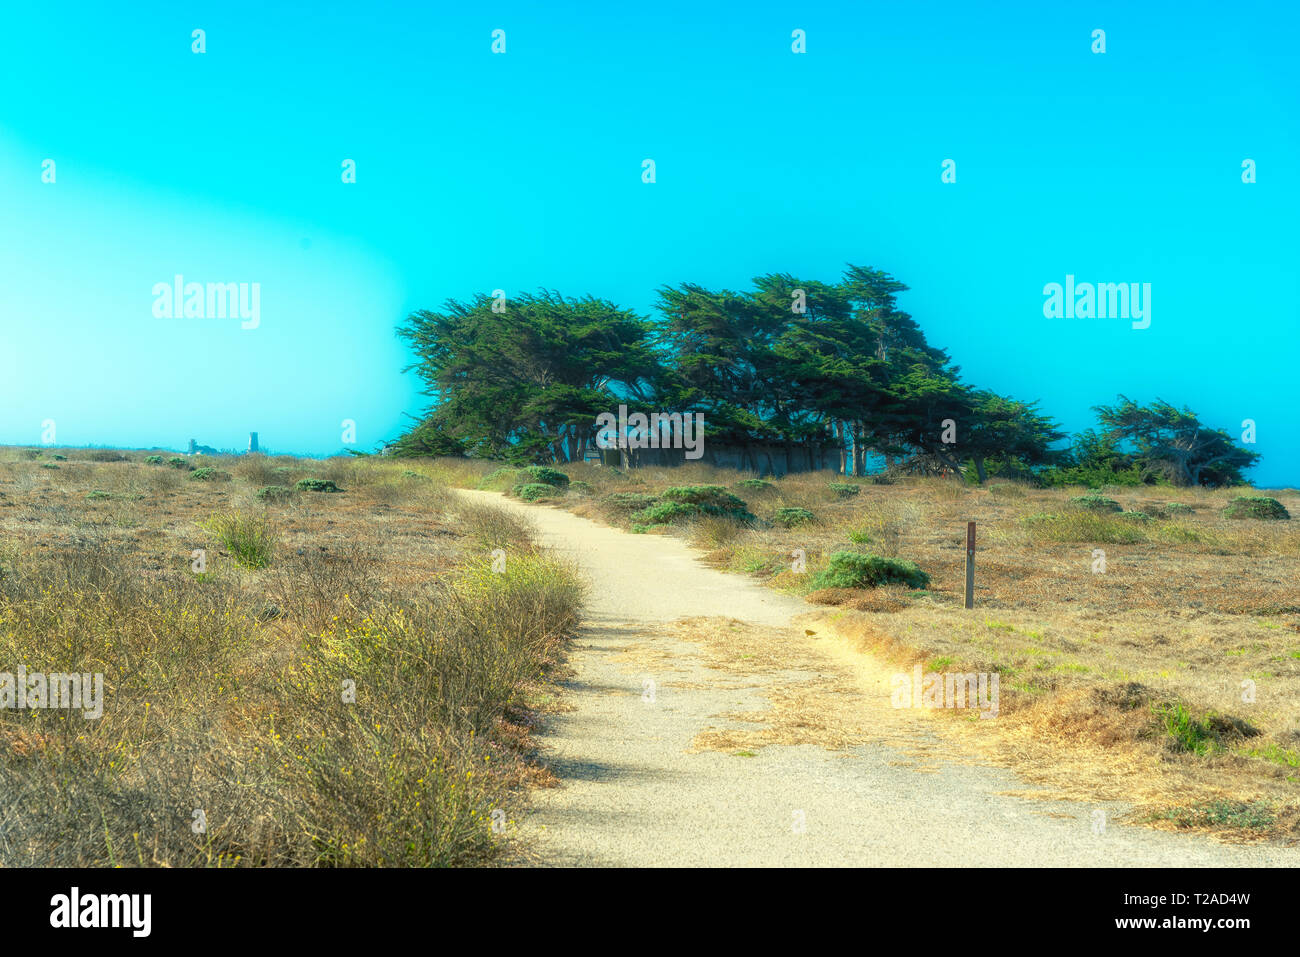 Unpaved road leading to a grove f trees through brown grassy fields under blue skies. Stock Photo